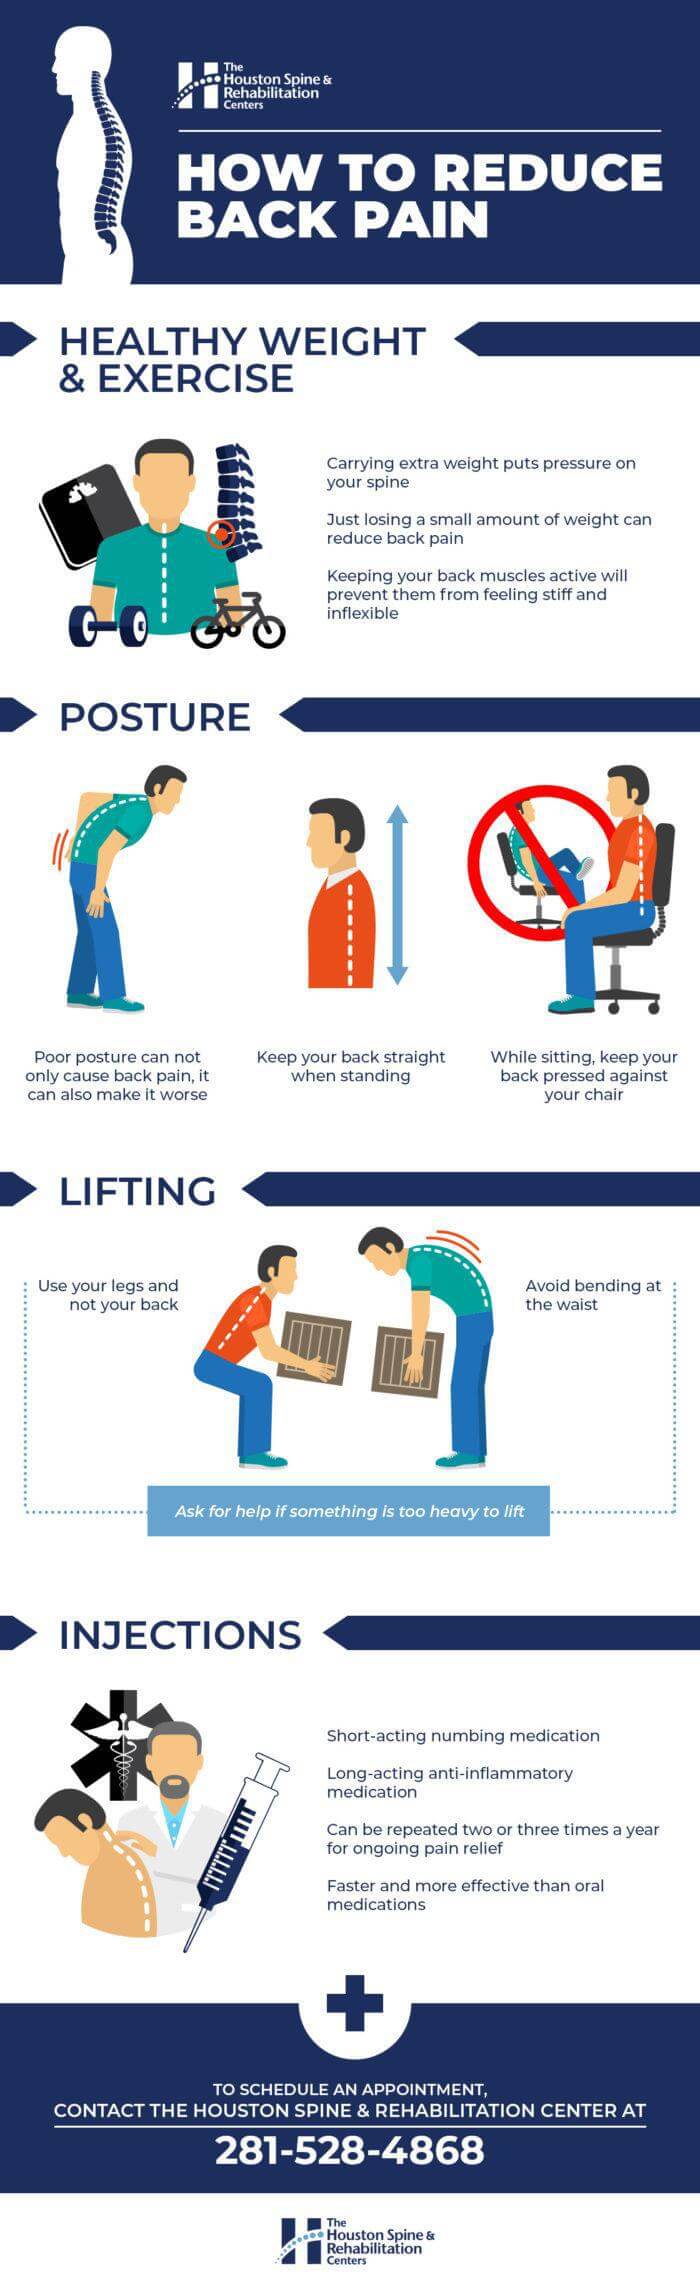 The poster of how to reduce back pain 